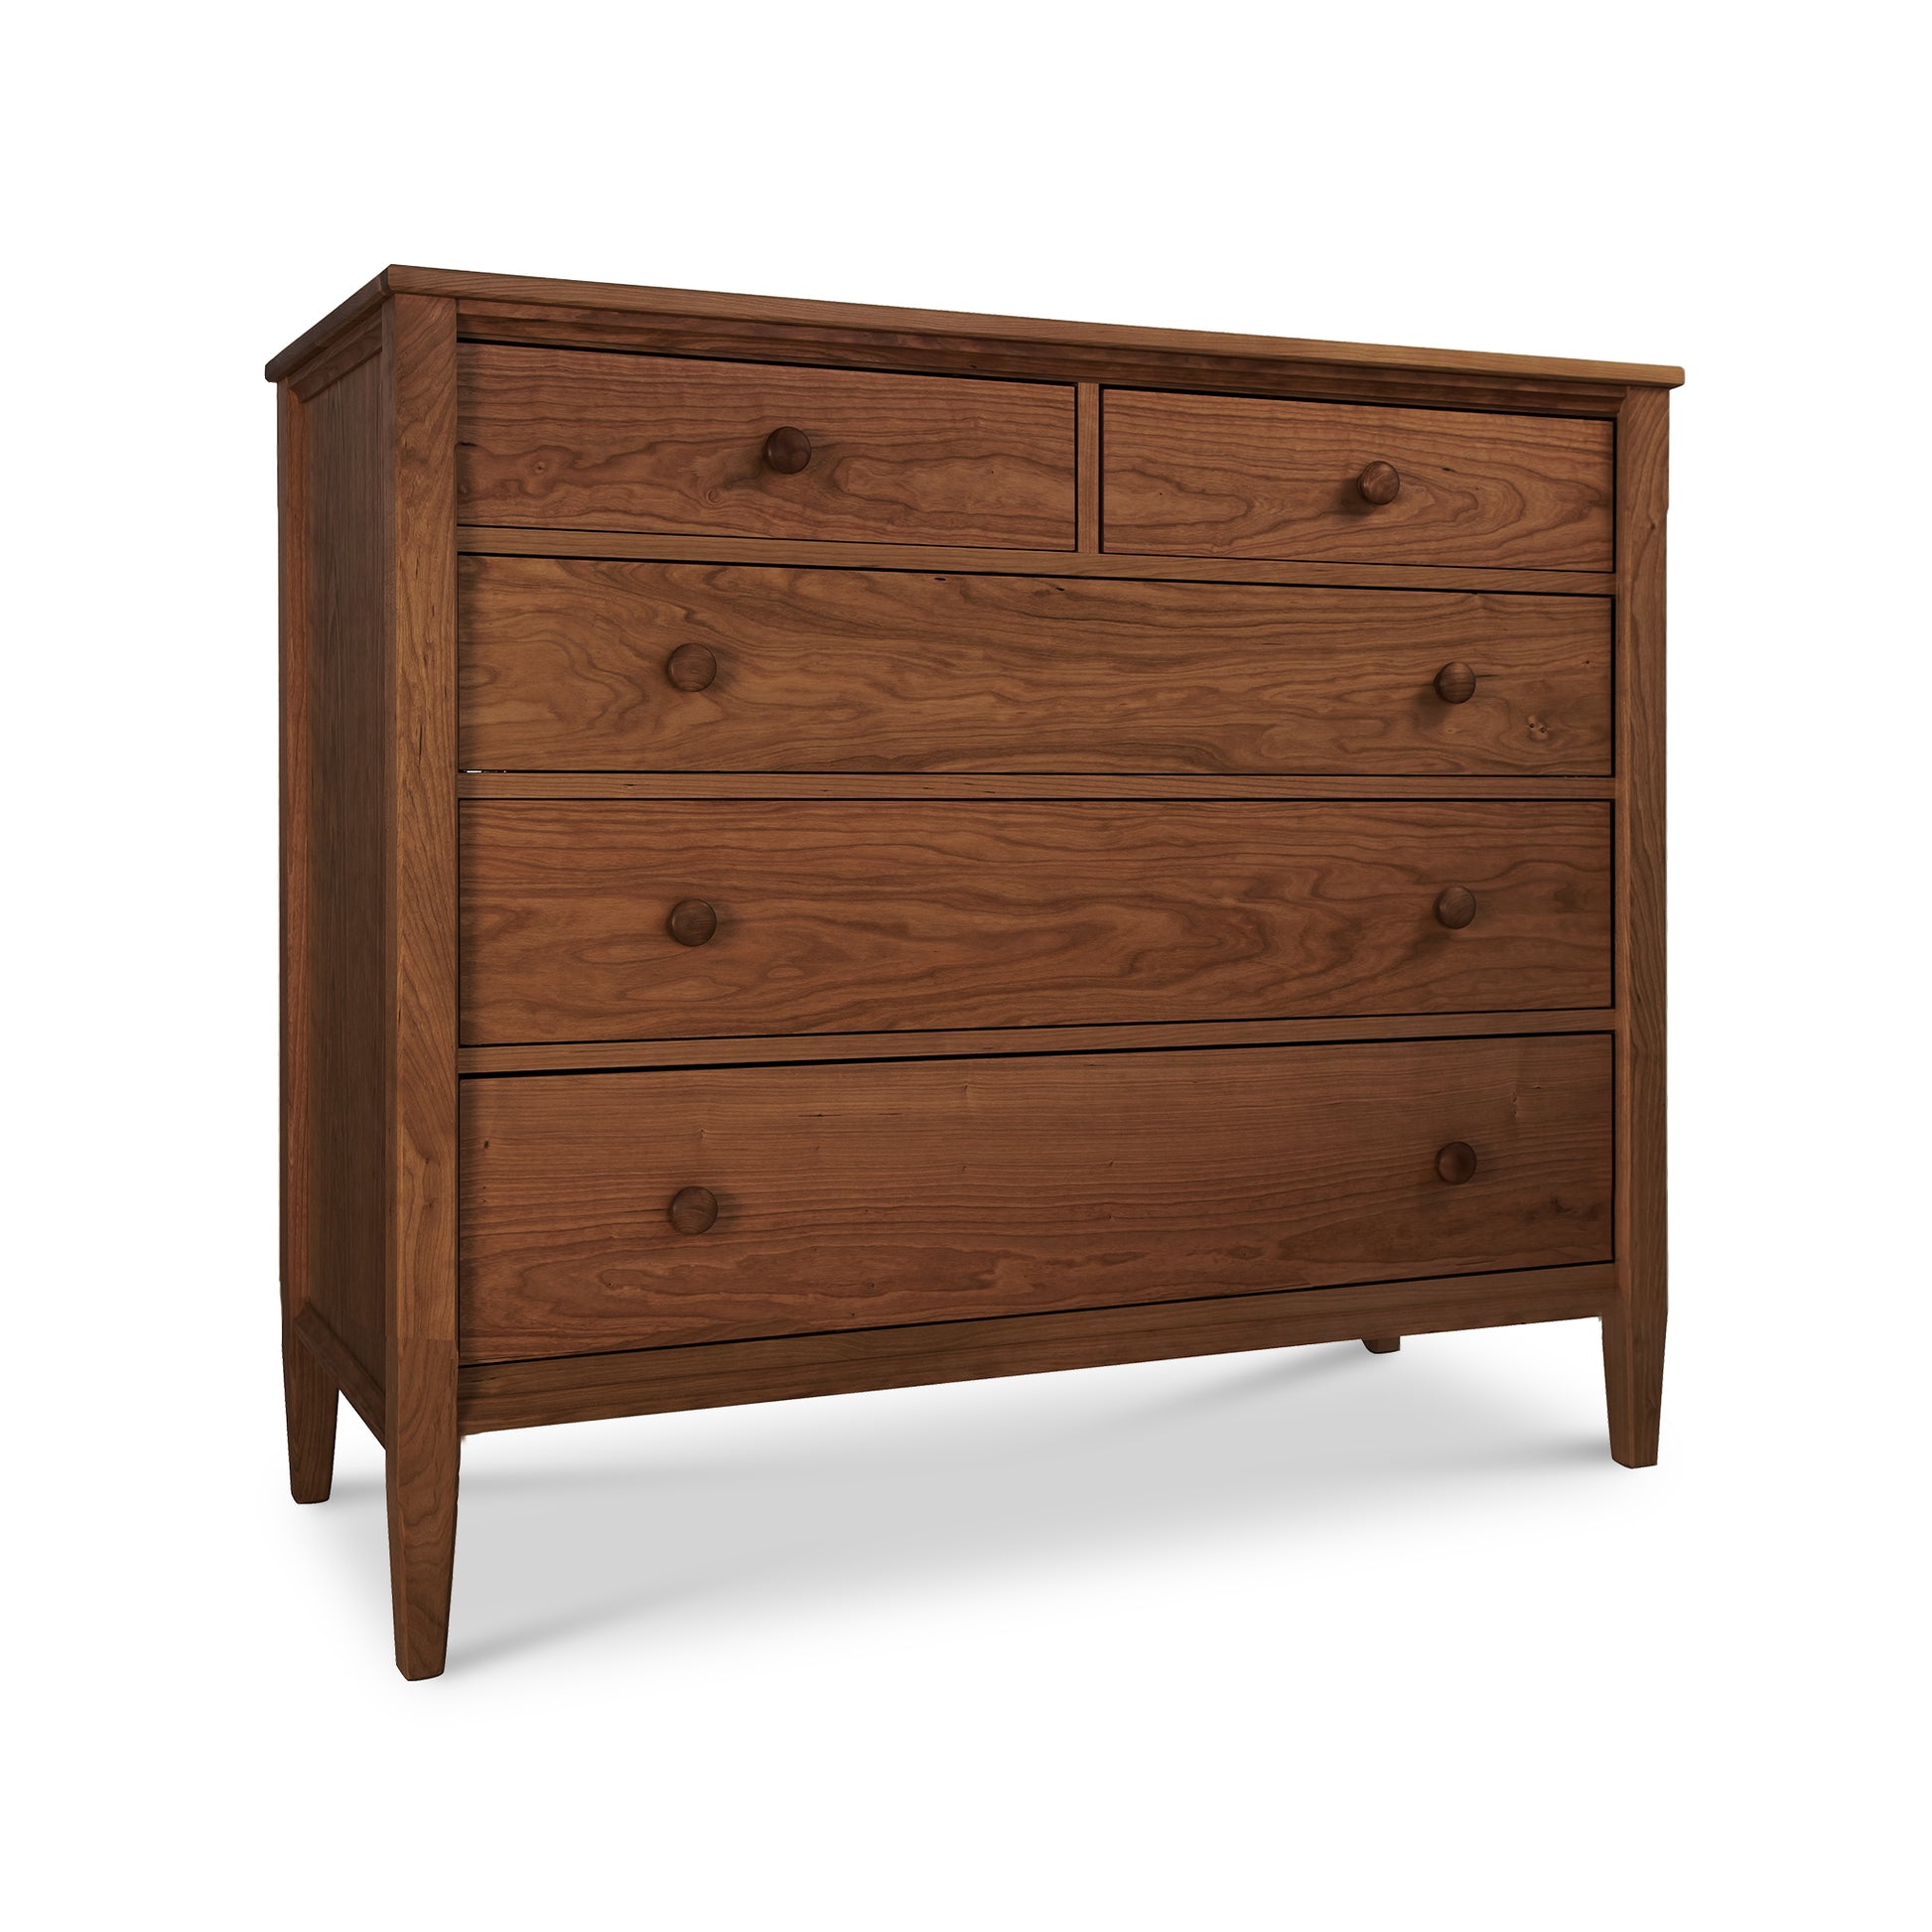 A natural cherry Maple Corner Woodworks Vermont Shaker Extra Wide Chest featuring three rows of drawers, with two small drawers on top followed by four larger drawers, set against a white background.